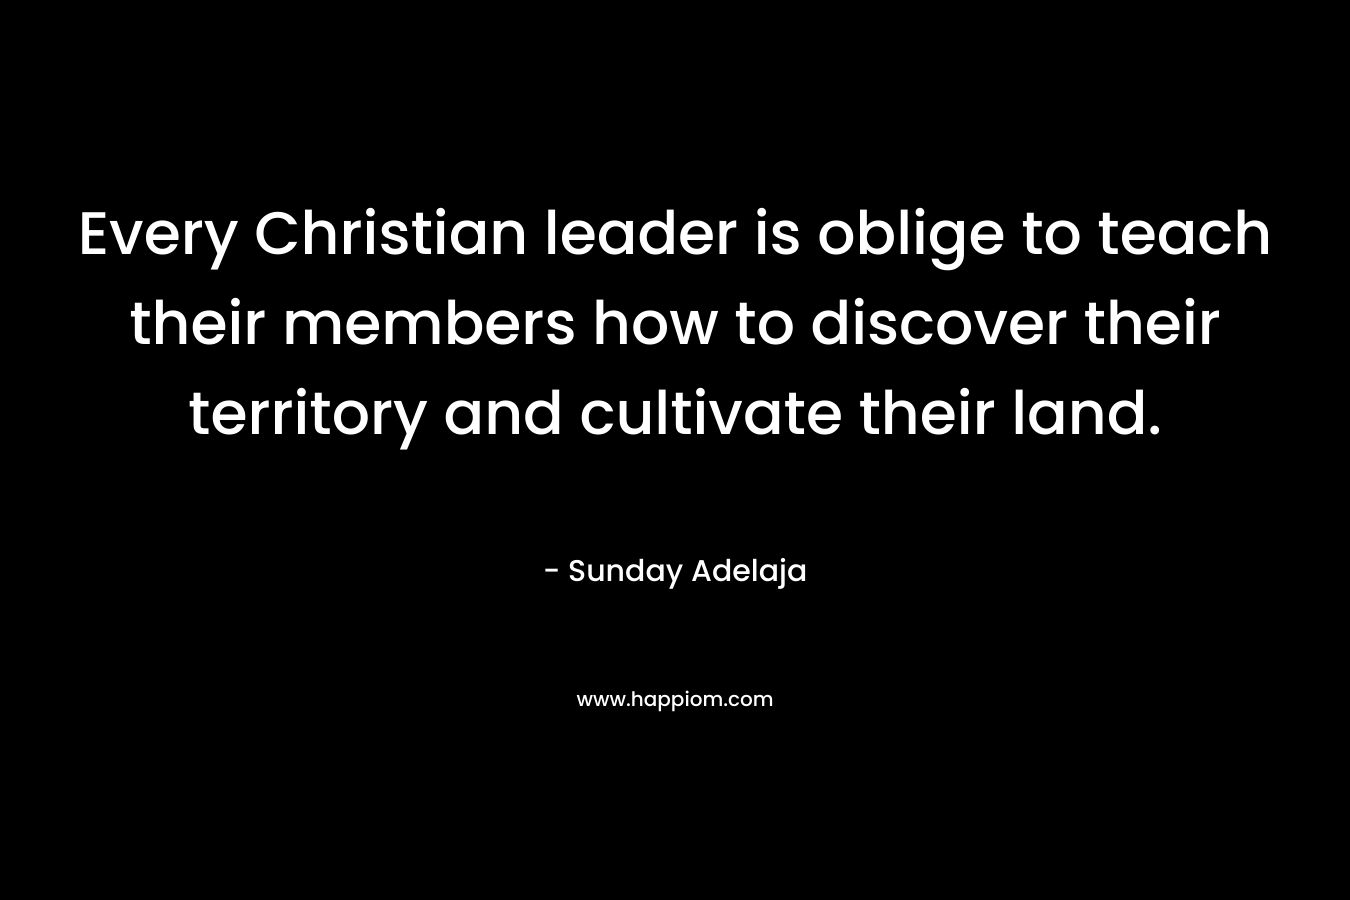 Every Christian leader is oblige to teach their members how to discover their territory and cultivate their land. – Sunday Adelaja